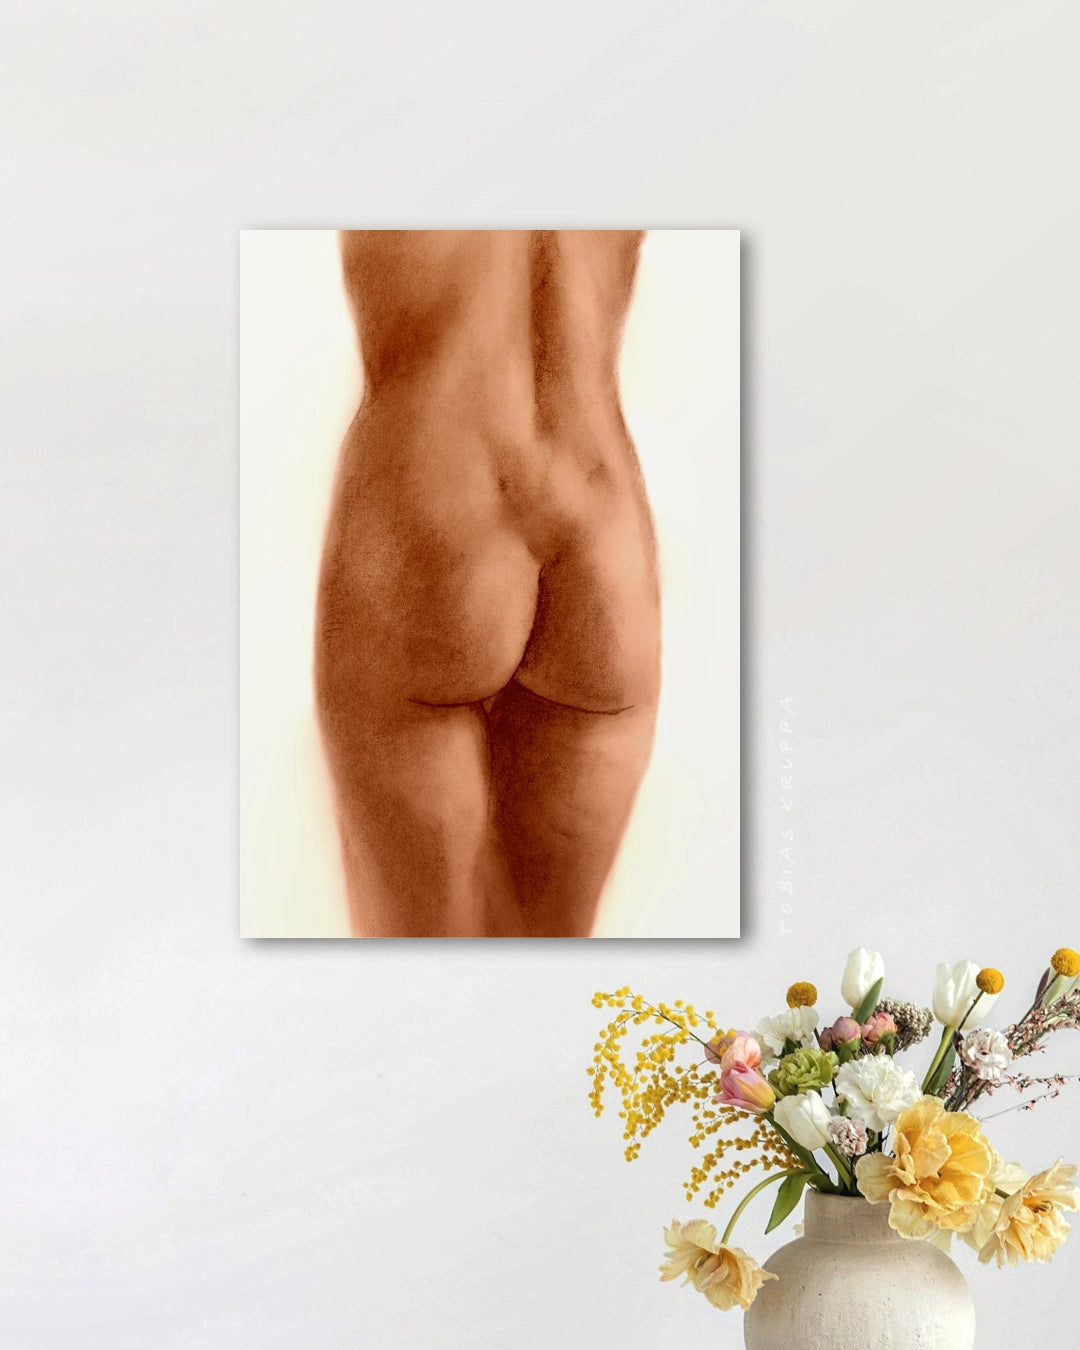 Elegant and tasteful fine art prints of female bottoms, showcasing different body shapes and cellulite